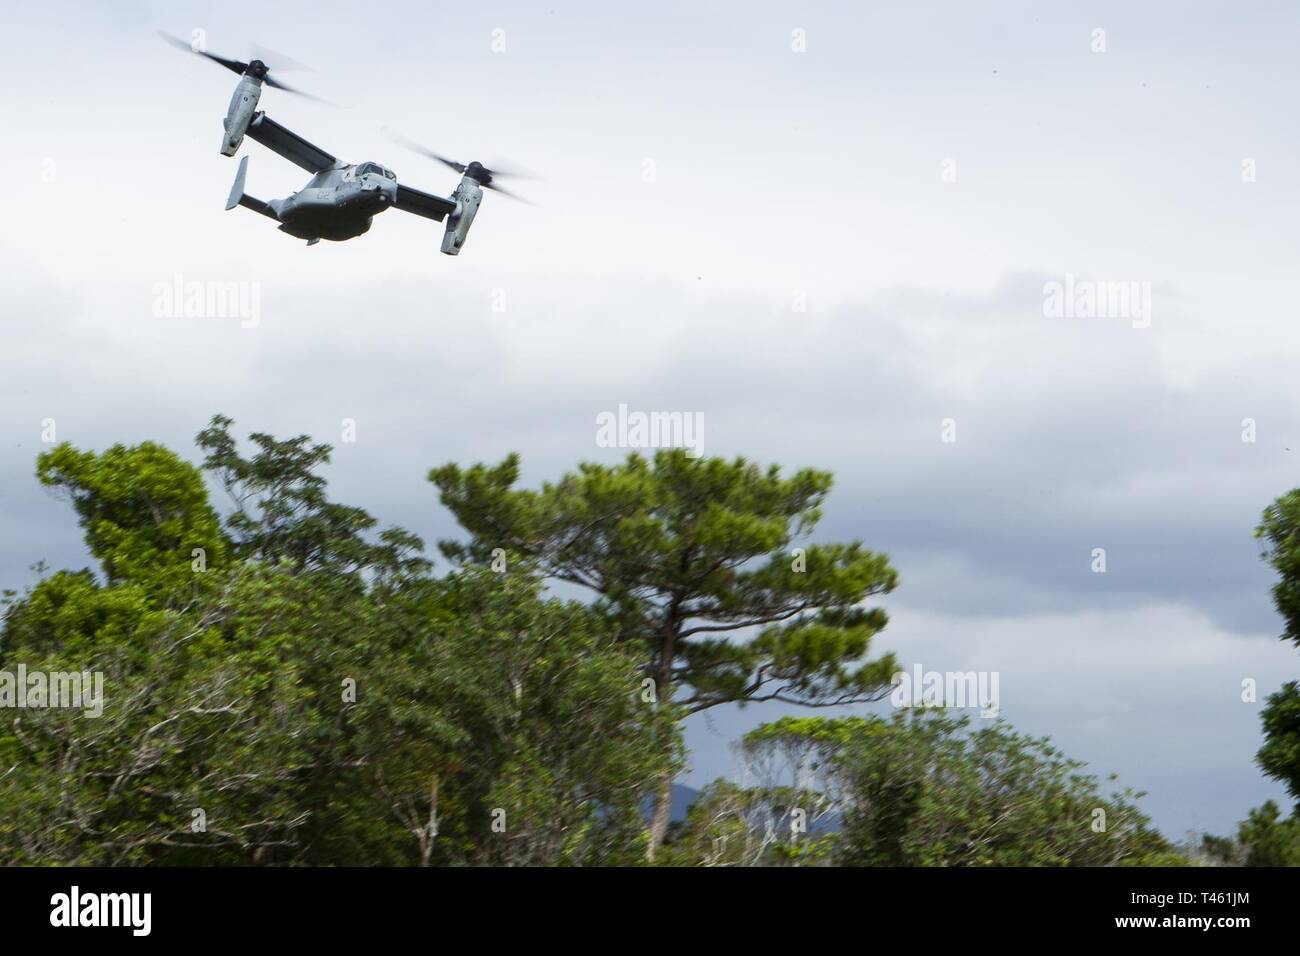 An MV-22B Osprey tiltrotor aircraft belonging to Marine Medium Tiltrotor Squadron 262 (reinforced) flies above Camp Schwab during platoon attack training at Camp Schwab, Okinawa, Japan, Feb. 28, 2019. During the training, Marines with Charlie Company, Battalion Landing Team, 1st Battalion, 4th Marines refined their ability “To locate, close with and destroy the enemy by fire and maneuver, or repel the enemy’s assault by fire and close combat,” the mission of the Marine Corps rifle squad. Charlie Company Marines are the airborne raid specialists with BLT 1/4, the Ground Combat Element for the 3 Stock Photo